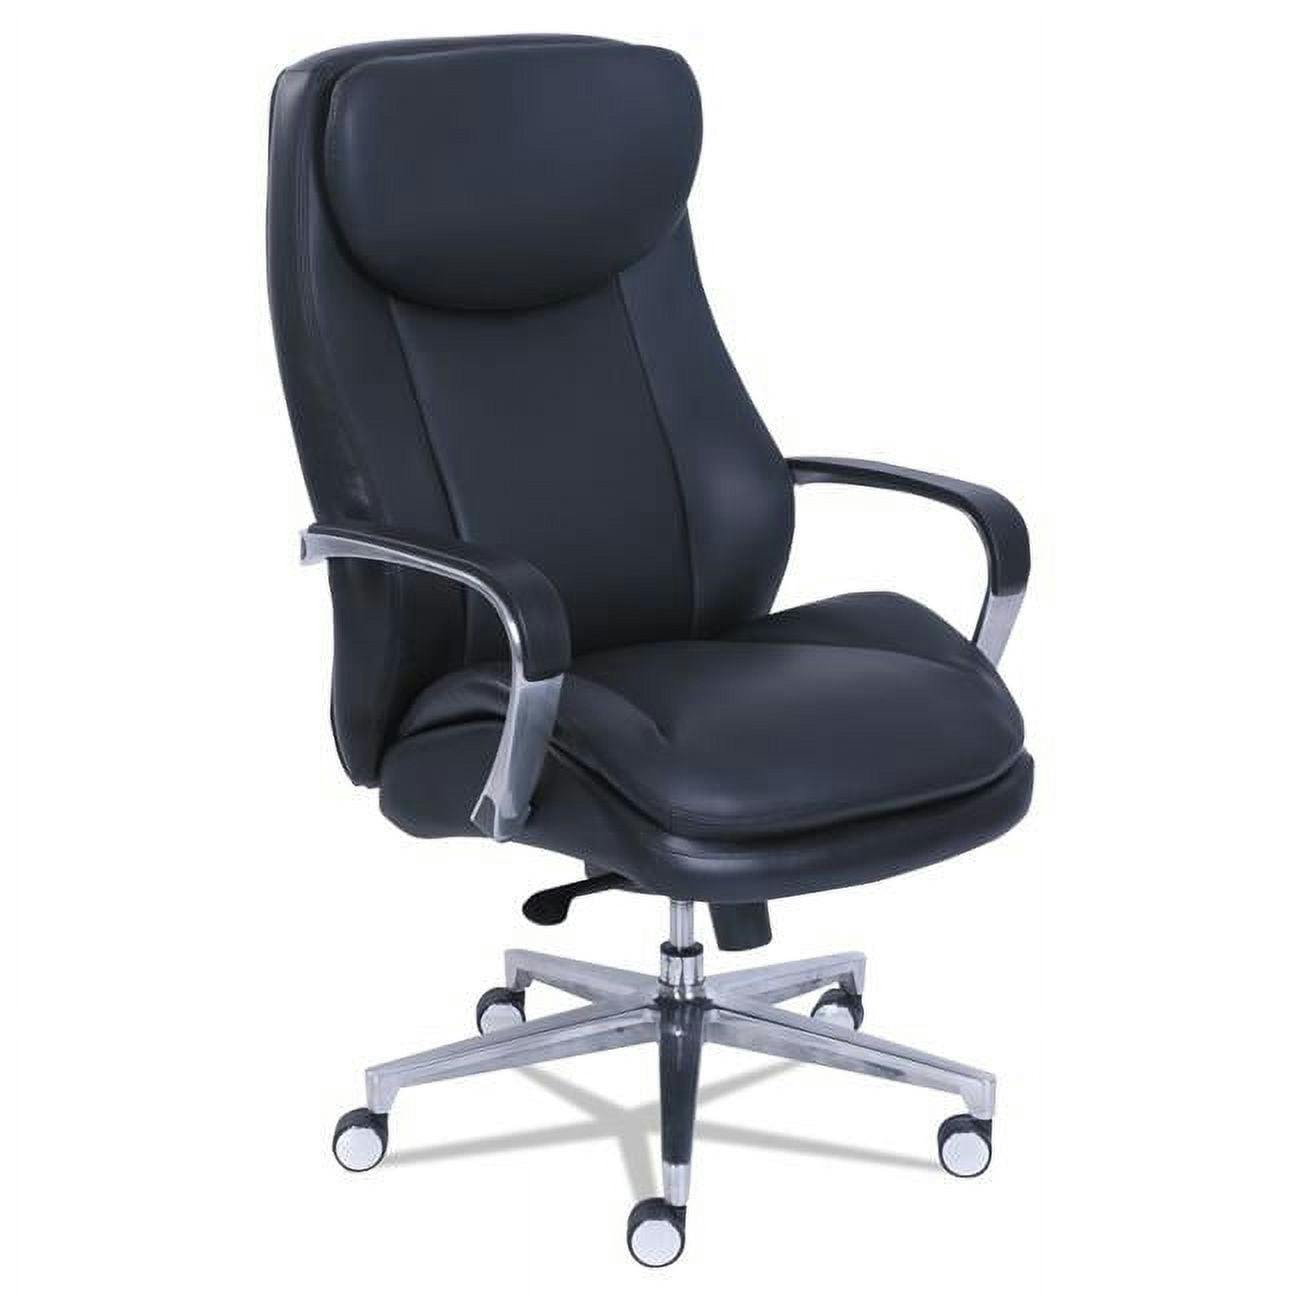 Sleek Black Leather Executive Swivel Chair with High Back and Metal Base